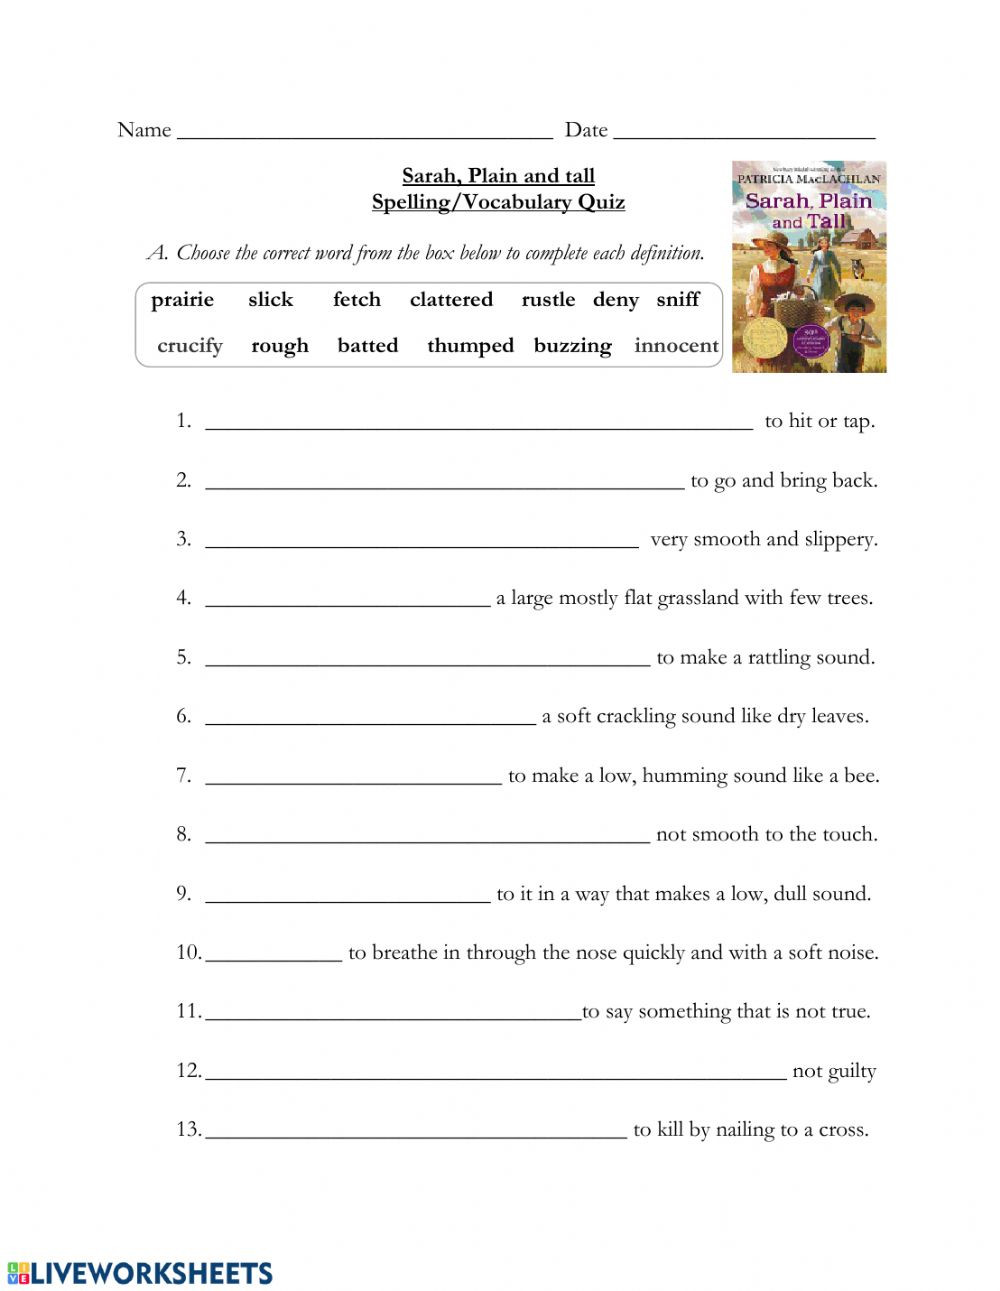 Sarah Plain and Tall Worksheet Spelling and Vocabulary Sarah Plain and Tall Interactive